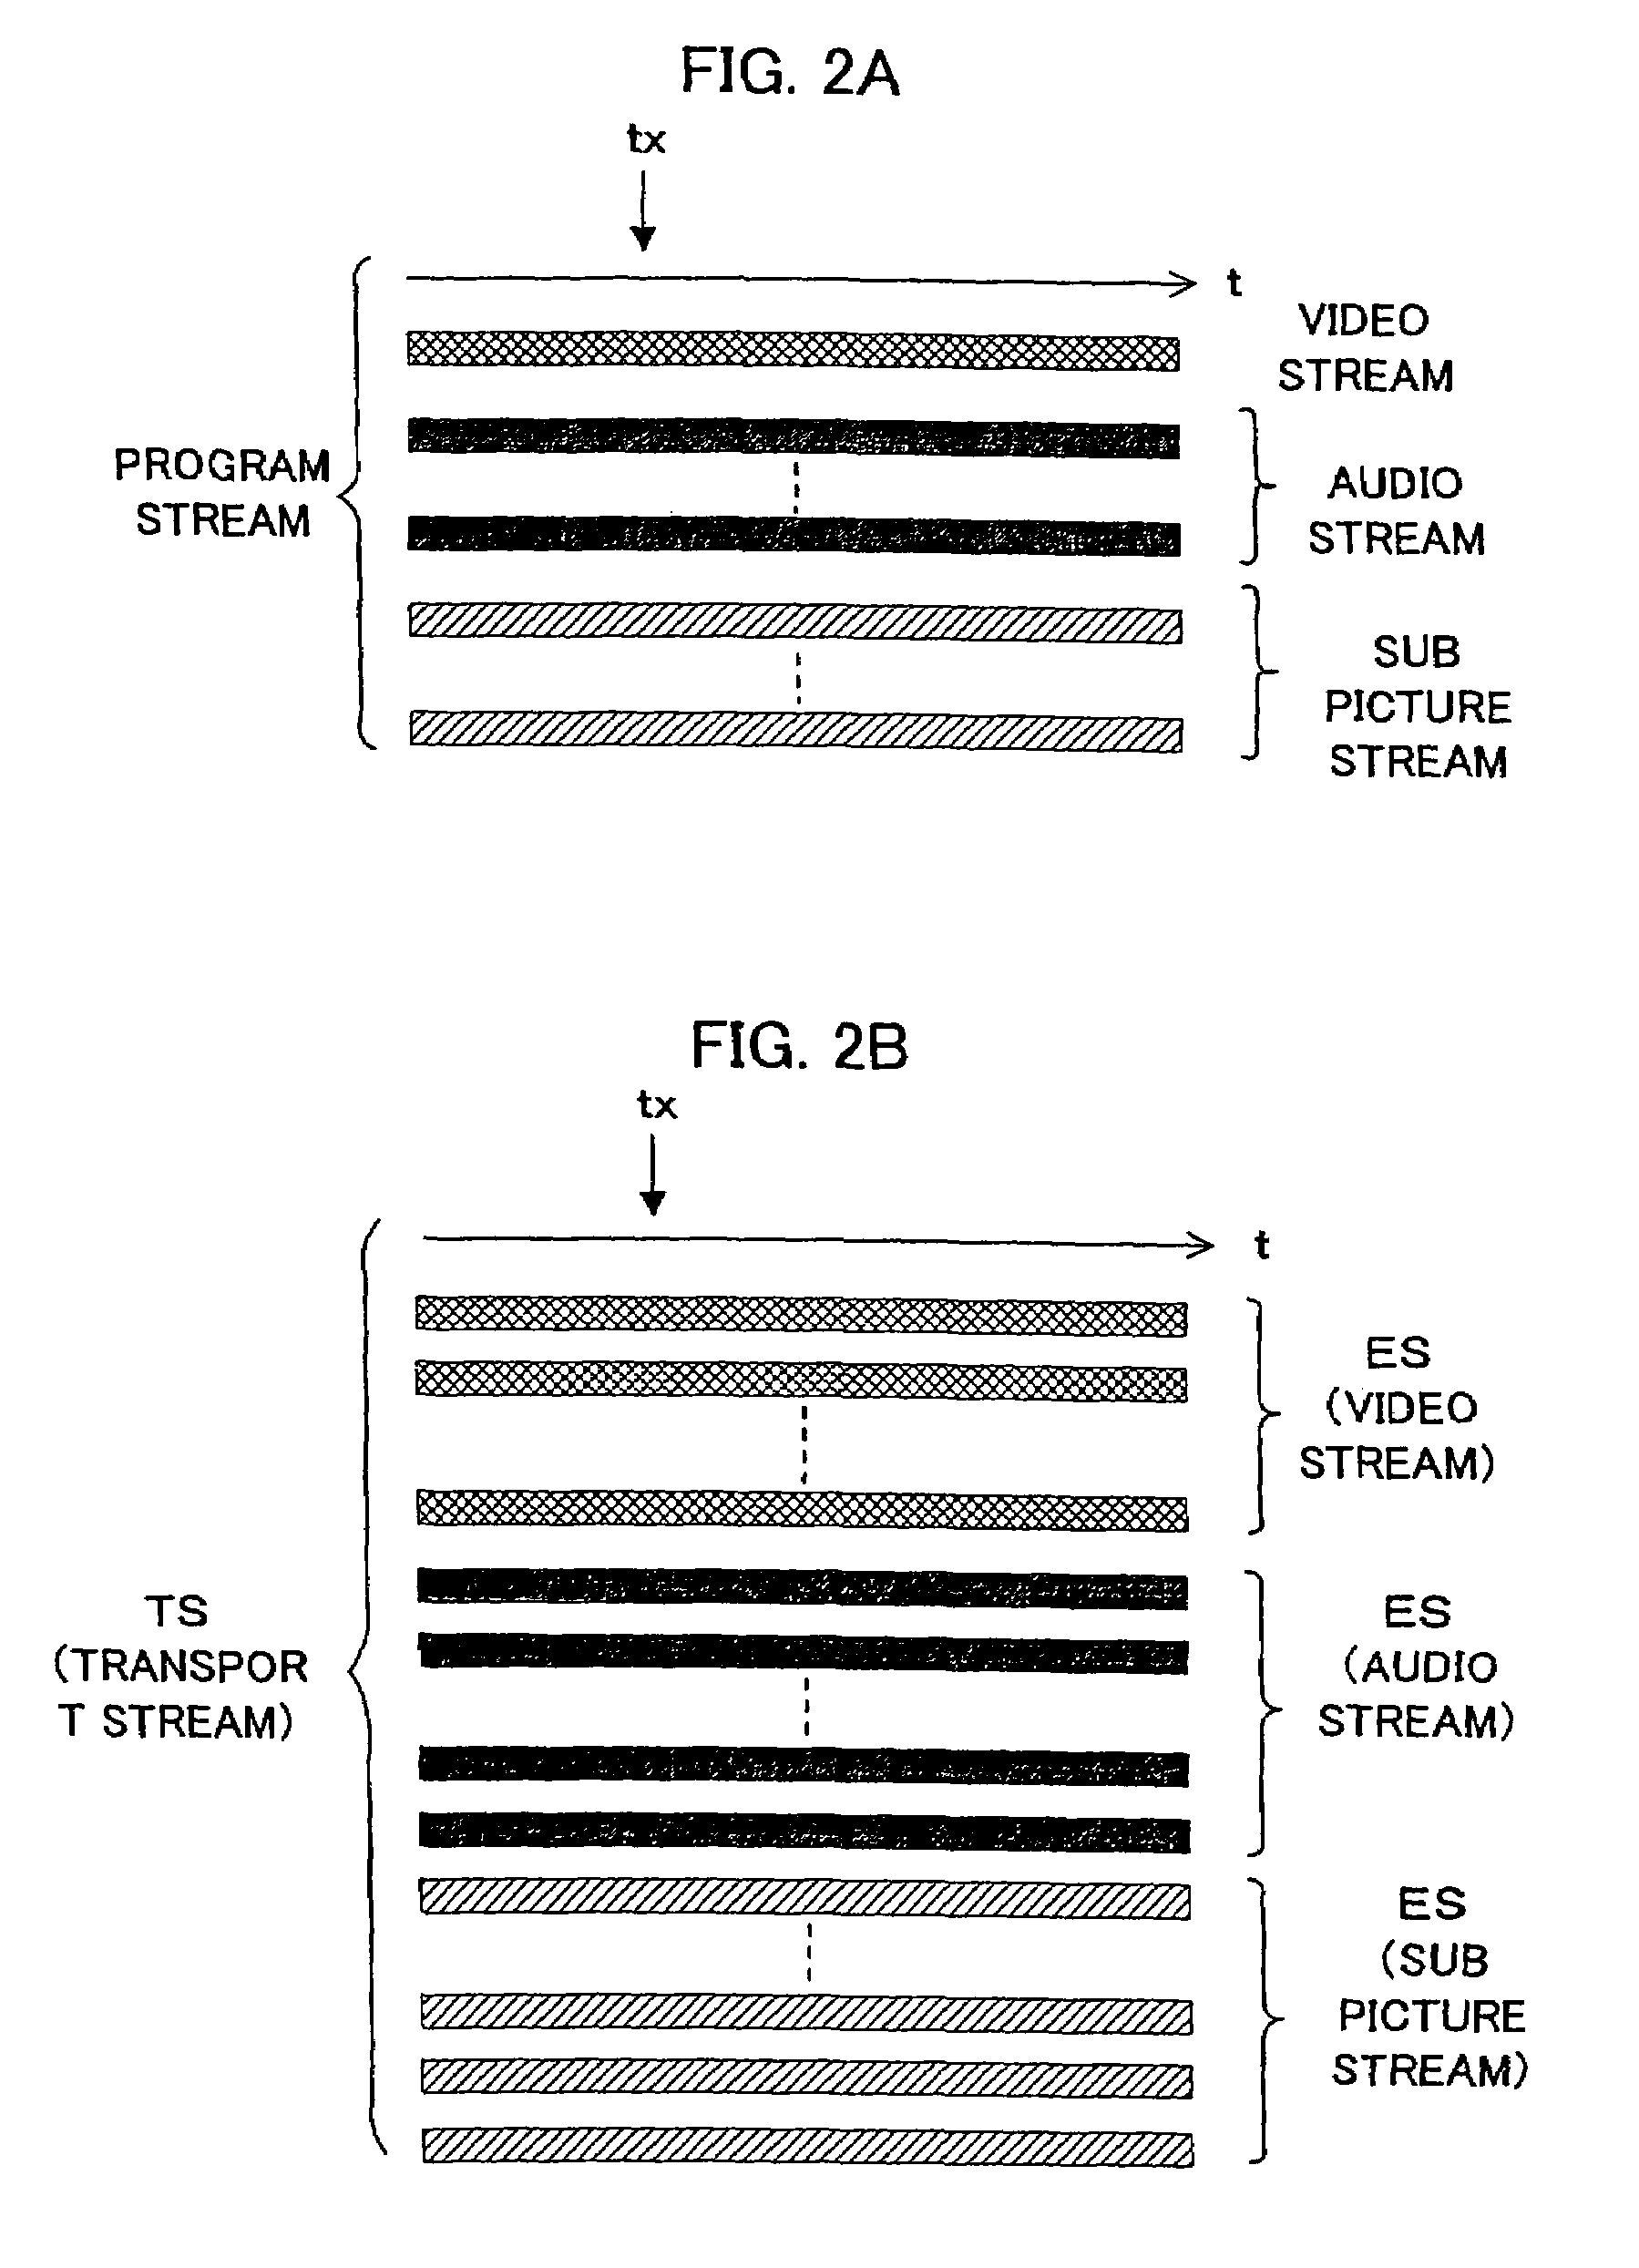 Information recording medium, information recording and/or reproducing apparatus and method, and program storage device and computer data signal embodied in carrier wave for controlling record or reproduction